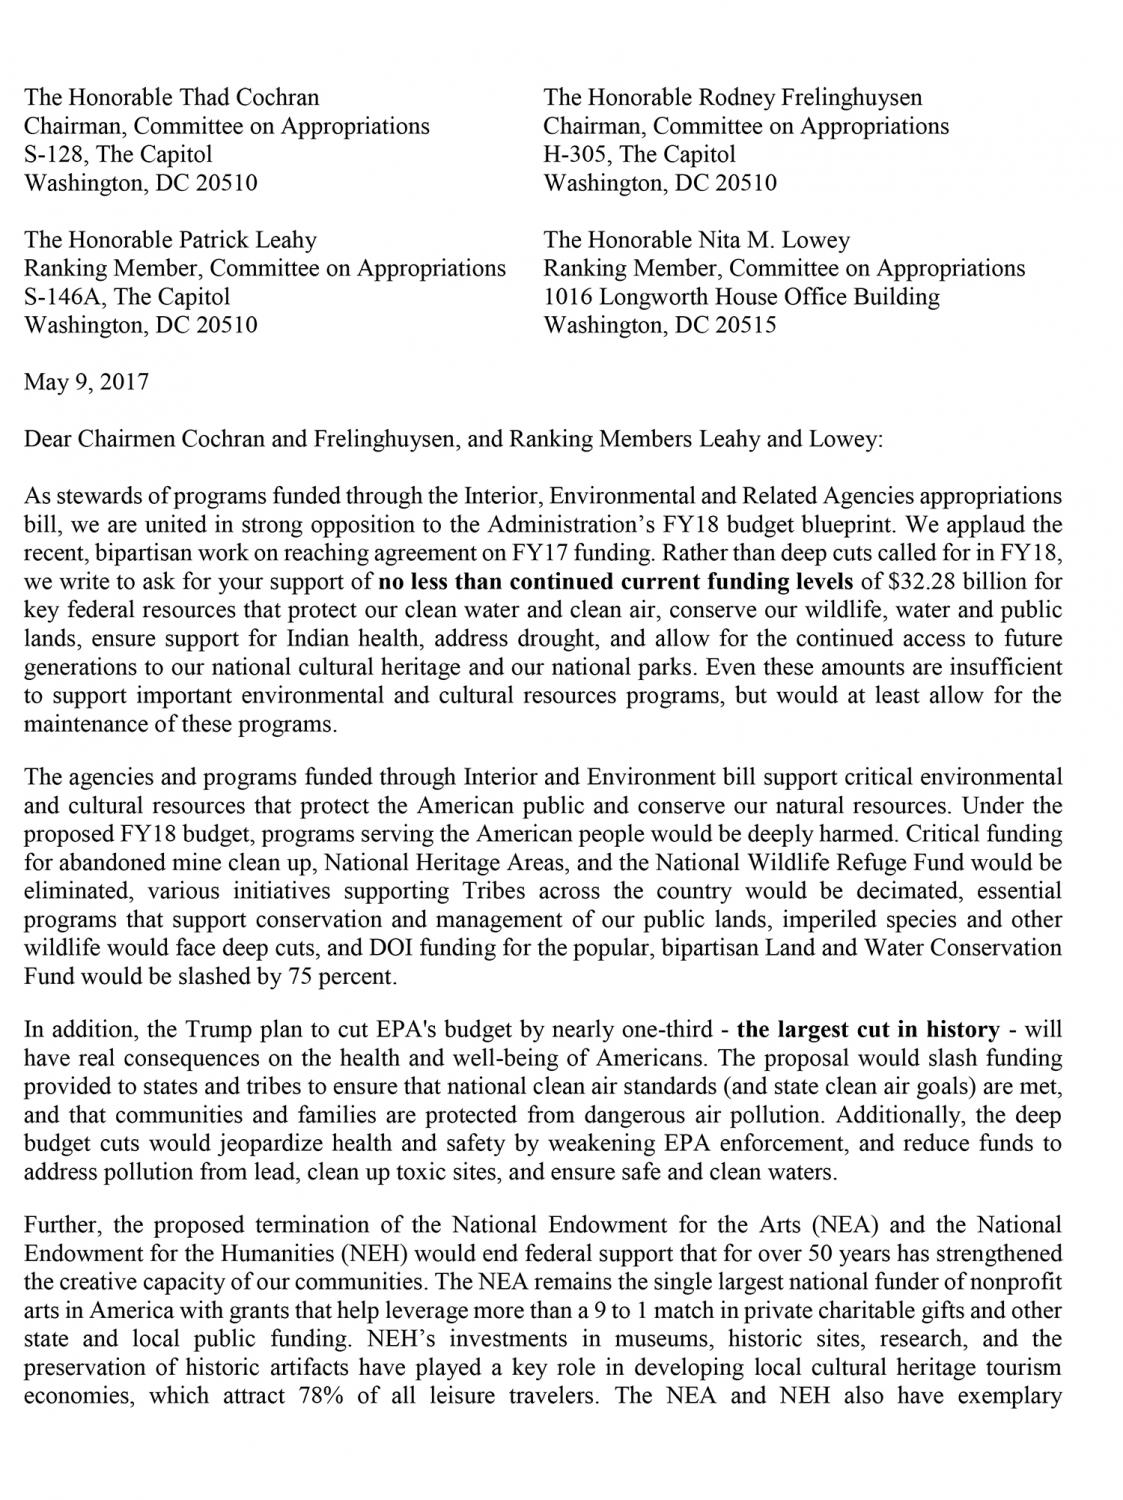 Letter of opposition to EPA budget cuts